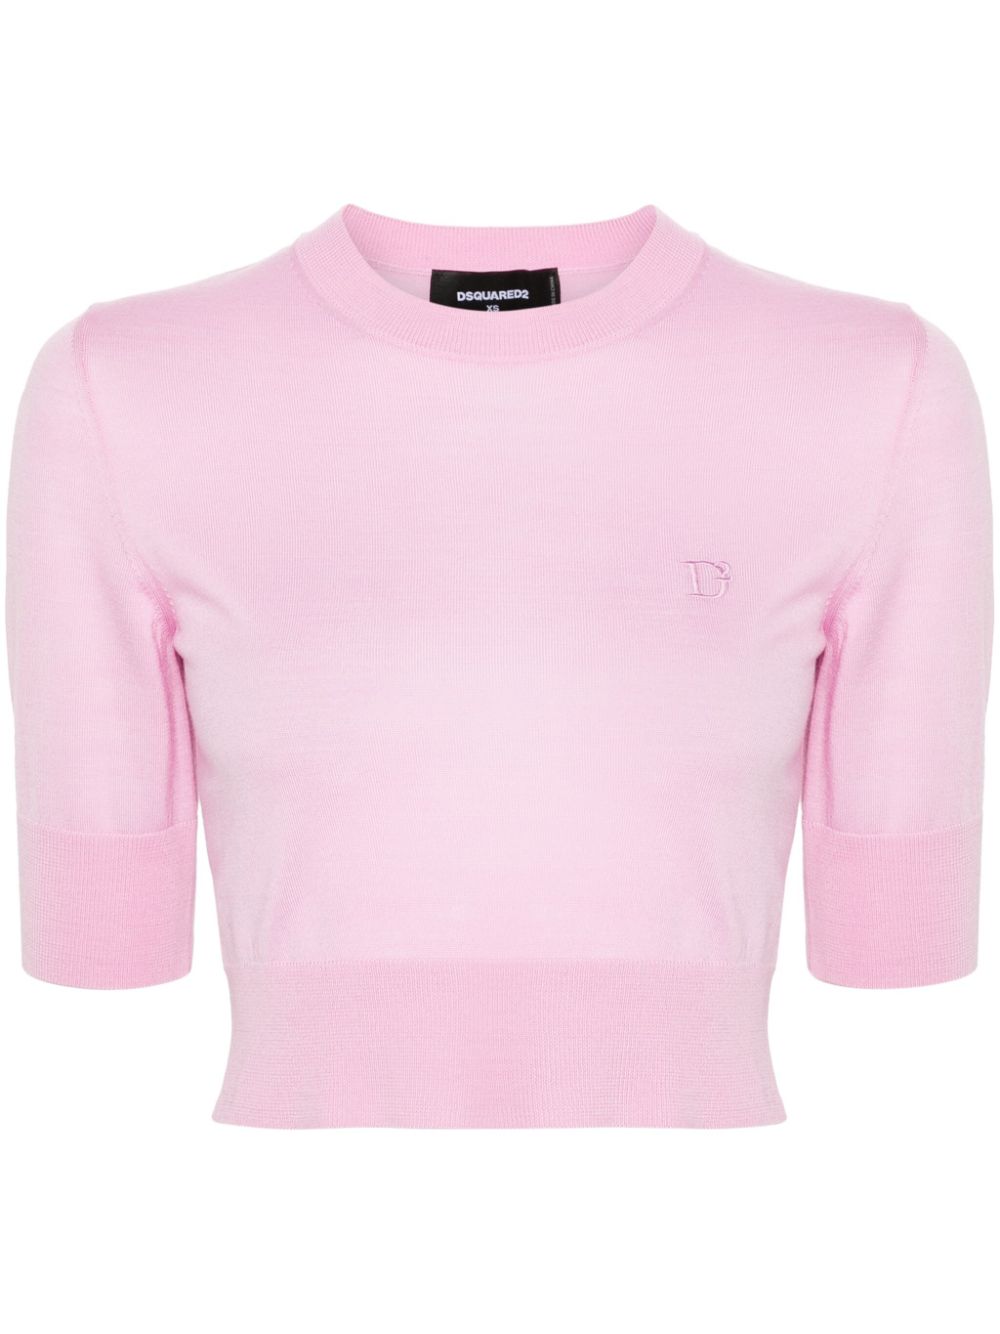 Image 1 of Dsquared2 fine-knit virgin wool top